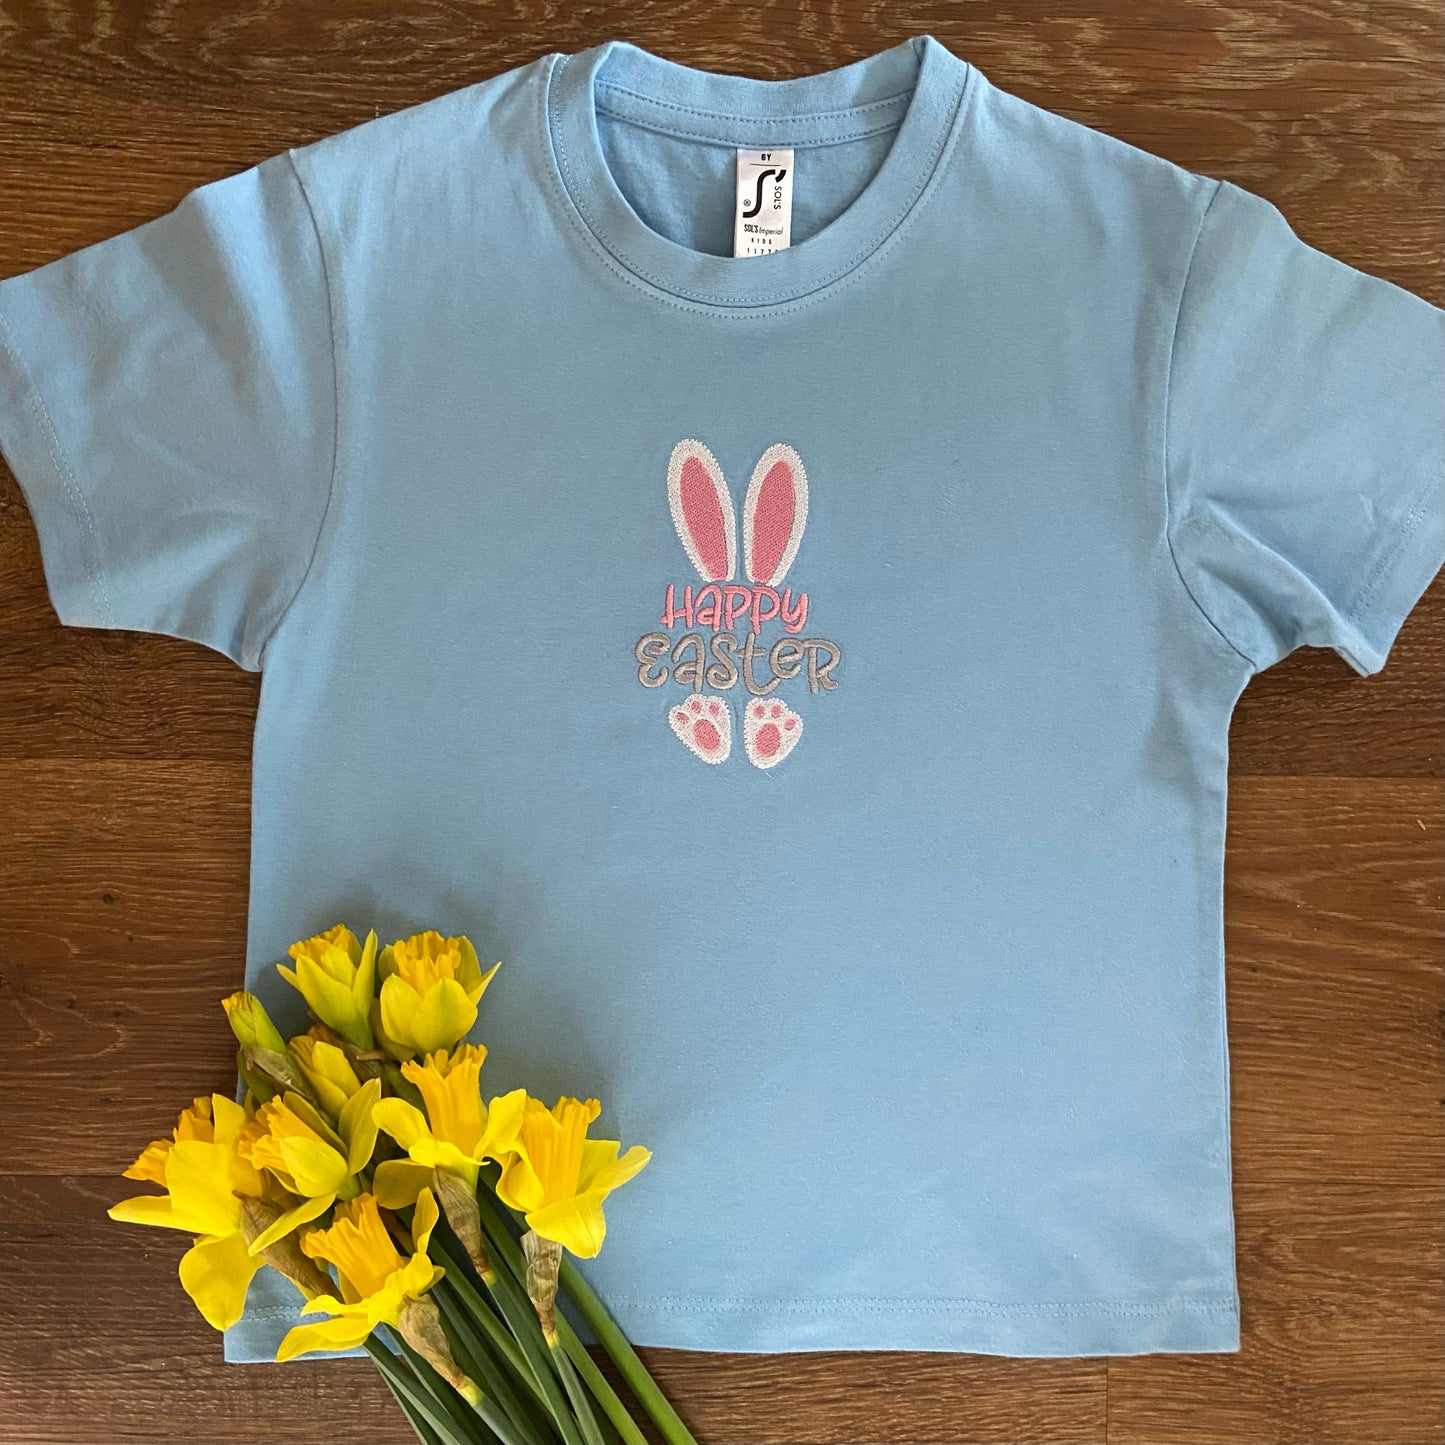 Happy Easter Embroidered Short Sleeve Kids Unisex T-Shirt. Age 2 -12 Years